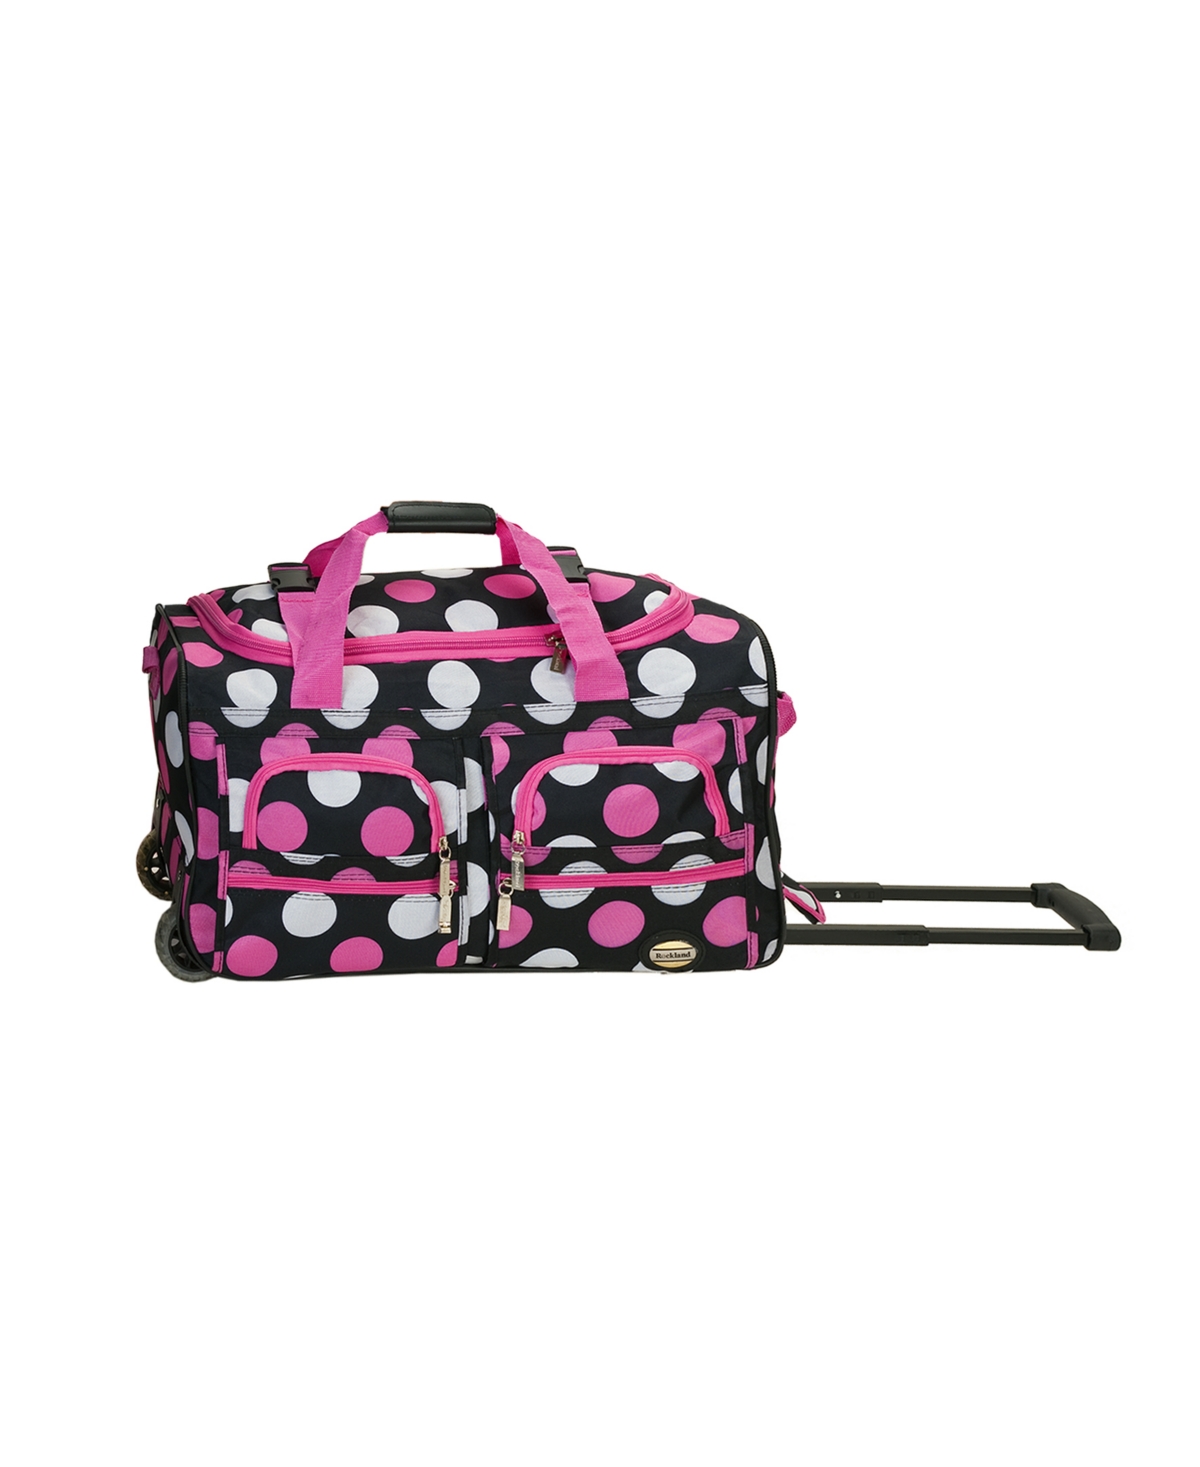 Rockland 22" Carry-on Rolling Duffle Bag In Pink  White Dots